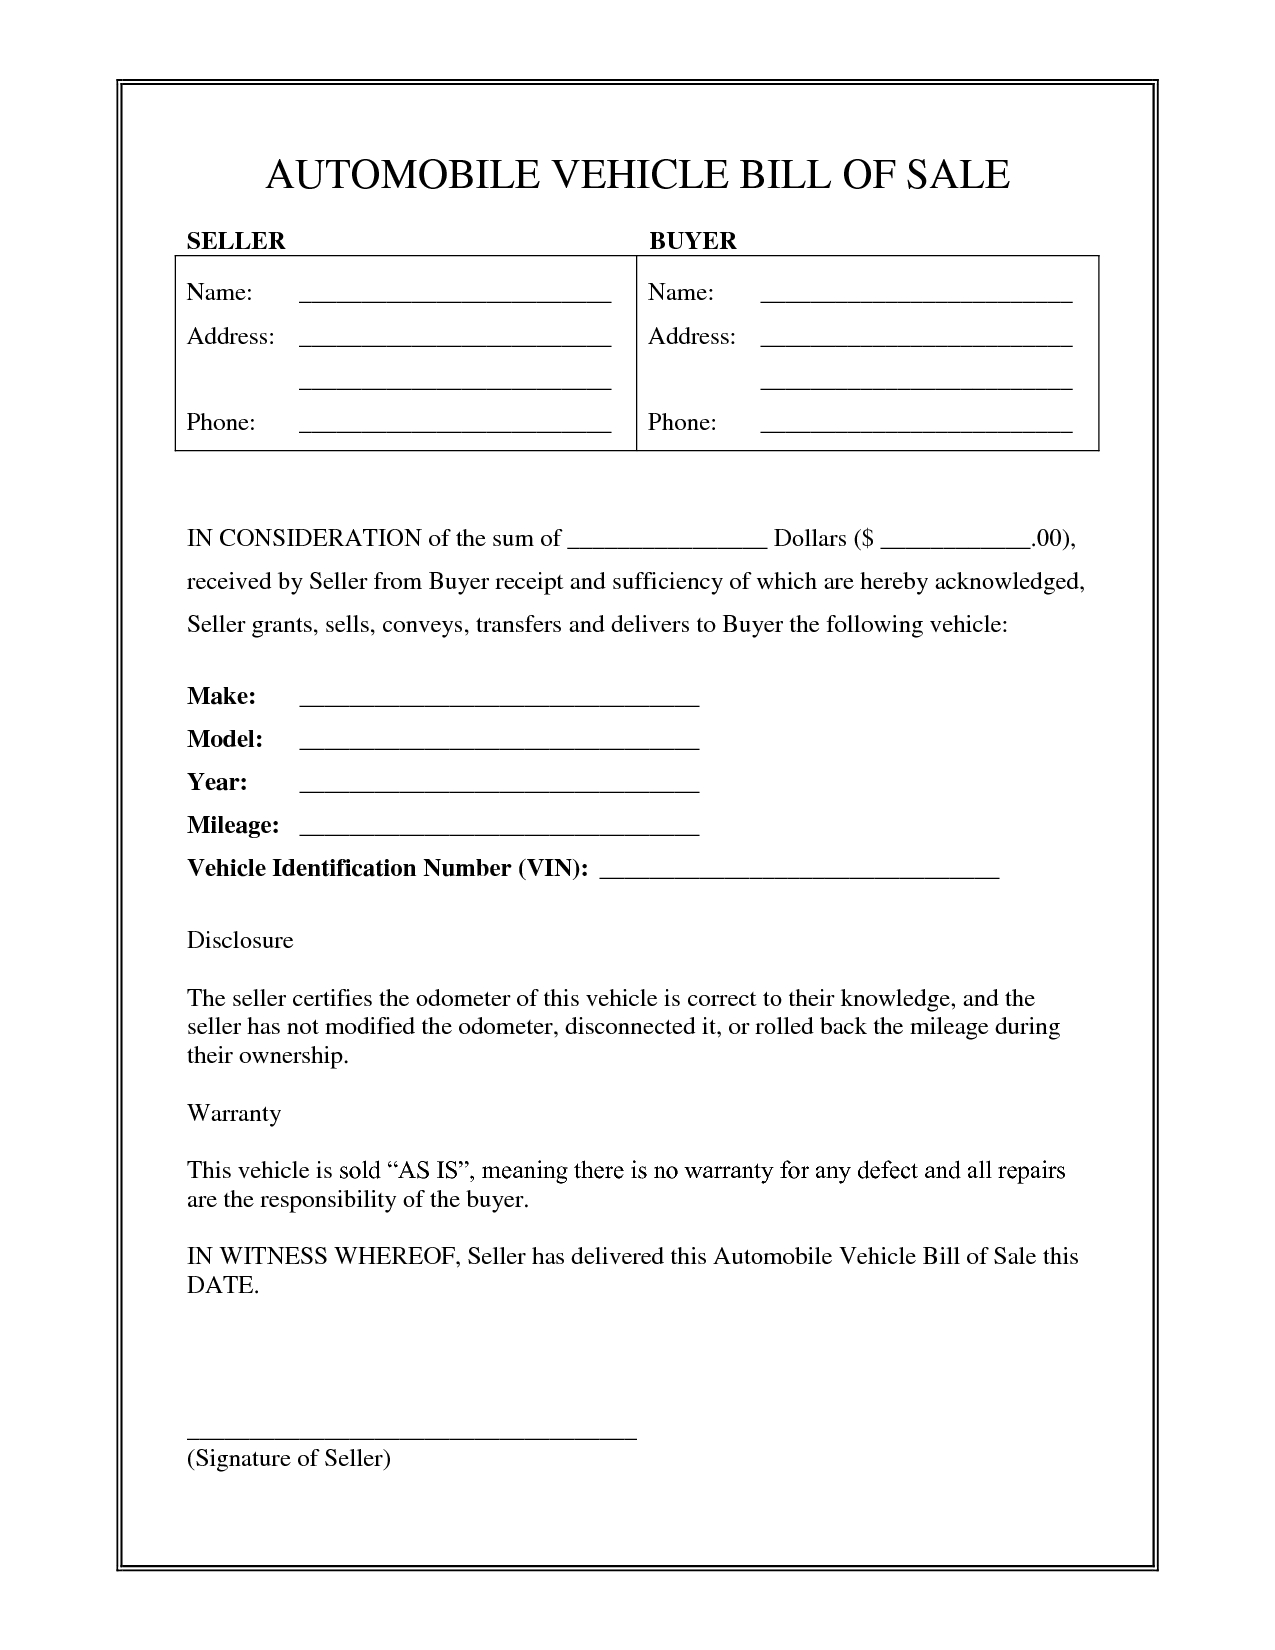 vehicle-bill-of-sale-no-warranty-template-business-template-ideas